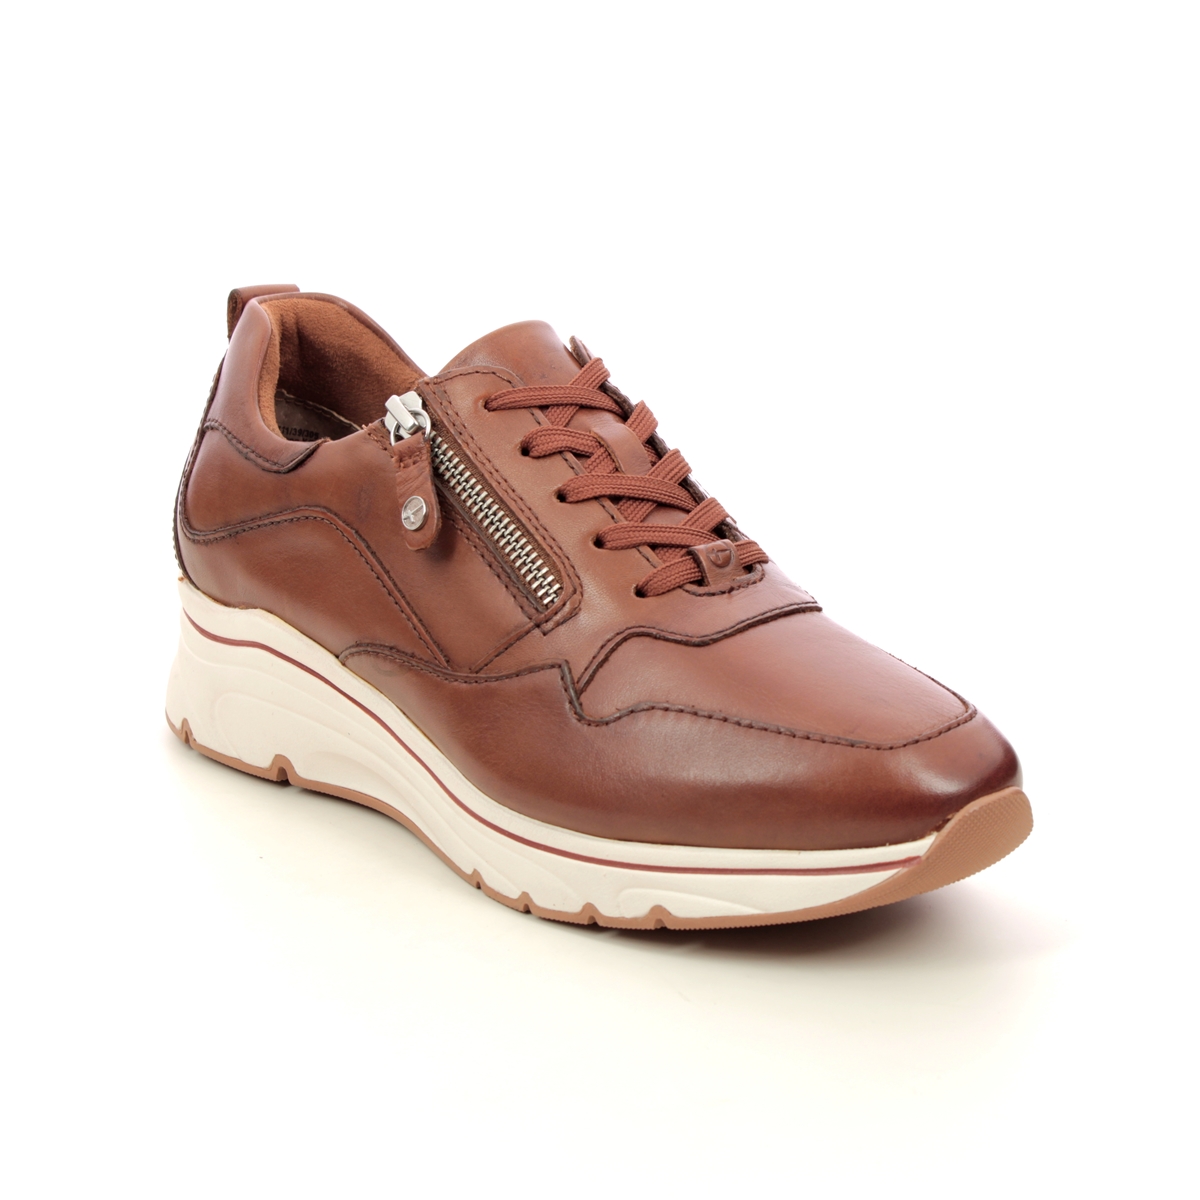 Tamaris Vinnie Tan Leather  Womens Trainers 23711-39-305 In Size 38 In Plain Tan Leather